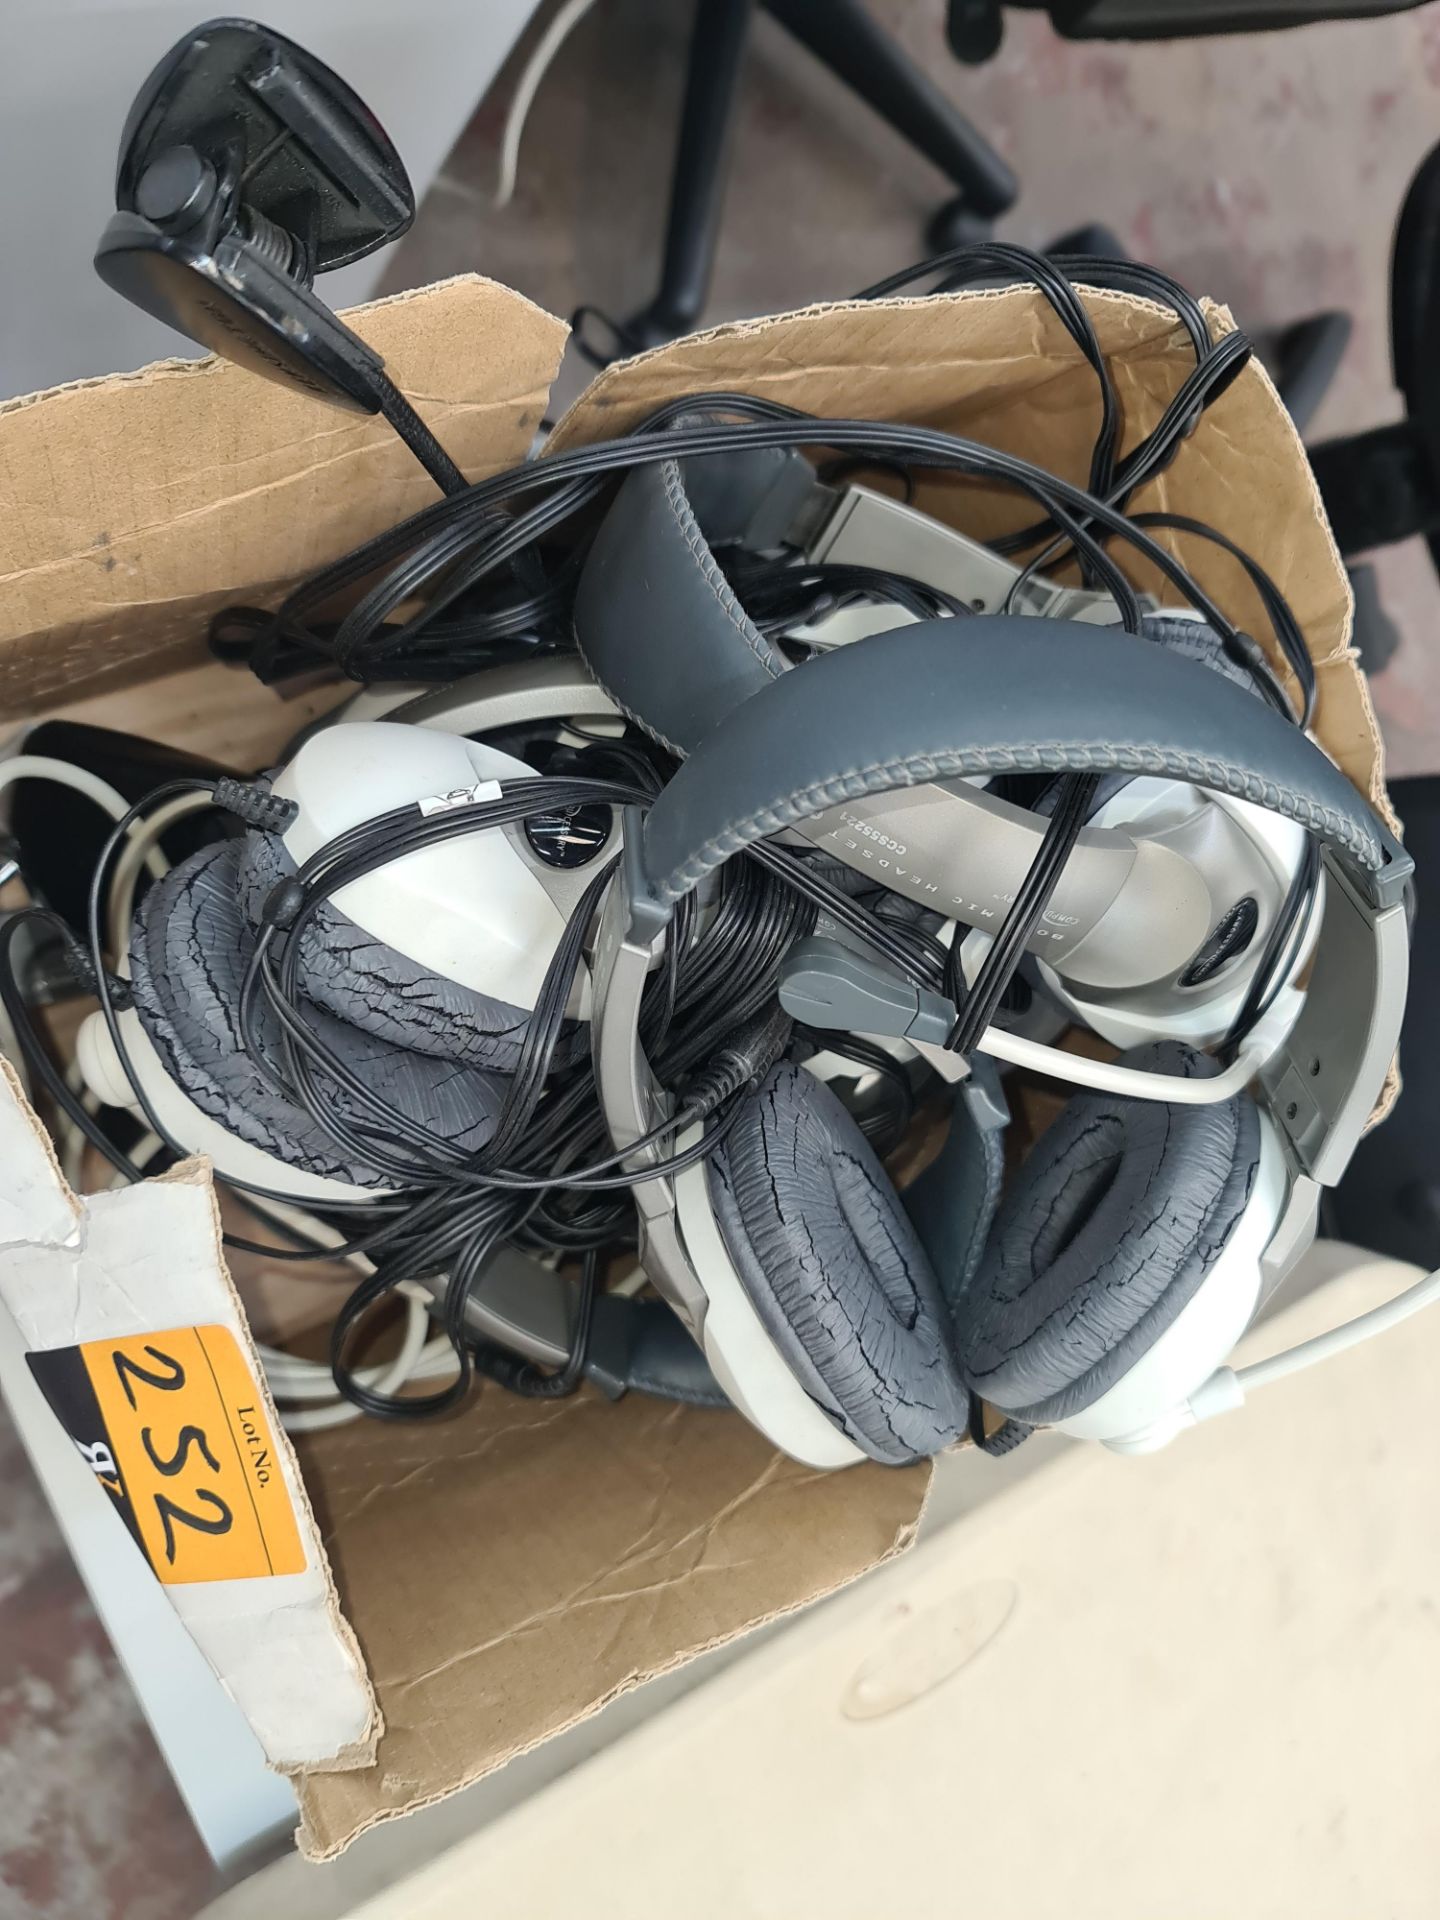 7 off Compucessory boom mic headsets plus other IT related items - Image 2 of 7